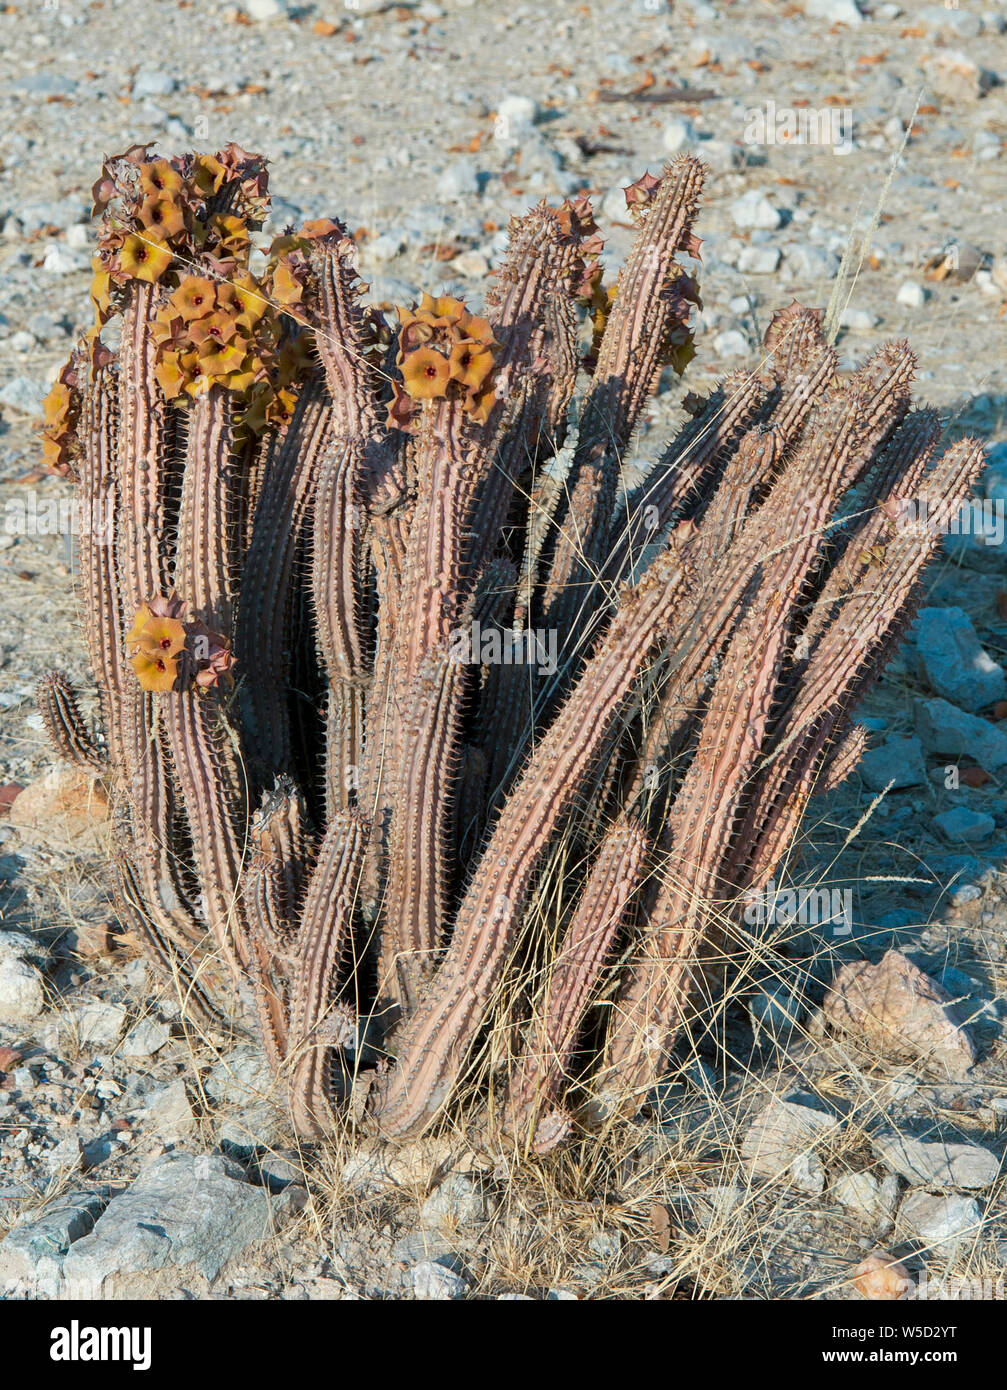 Flowering Hoodia gordonii, also known as Bushman's hat, is a leafless spiny succulent plant supposed to have therapeutic properties in folk medicine. Stock Photo